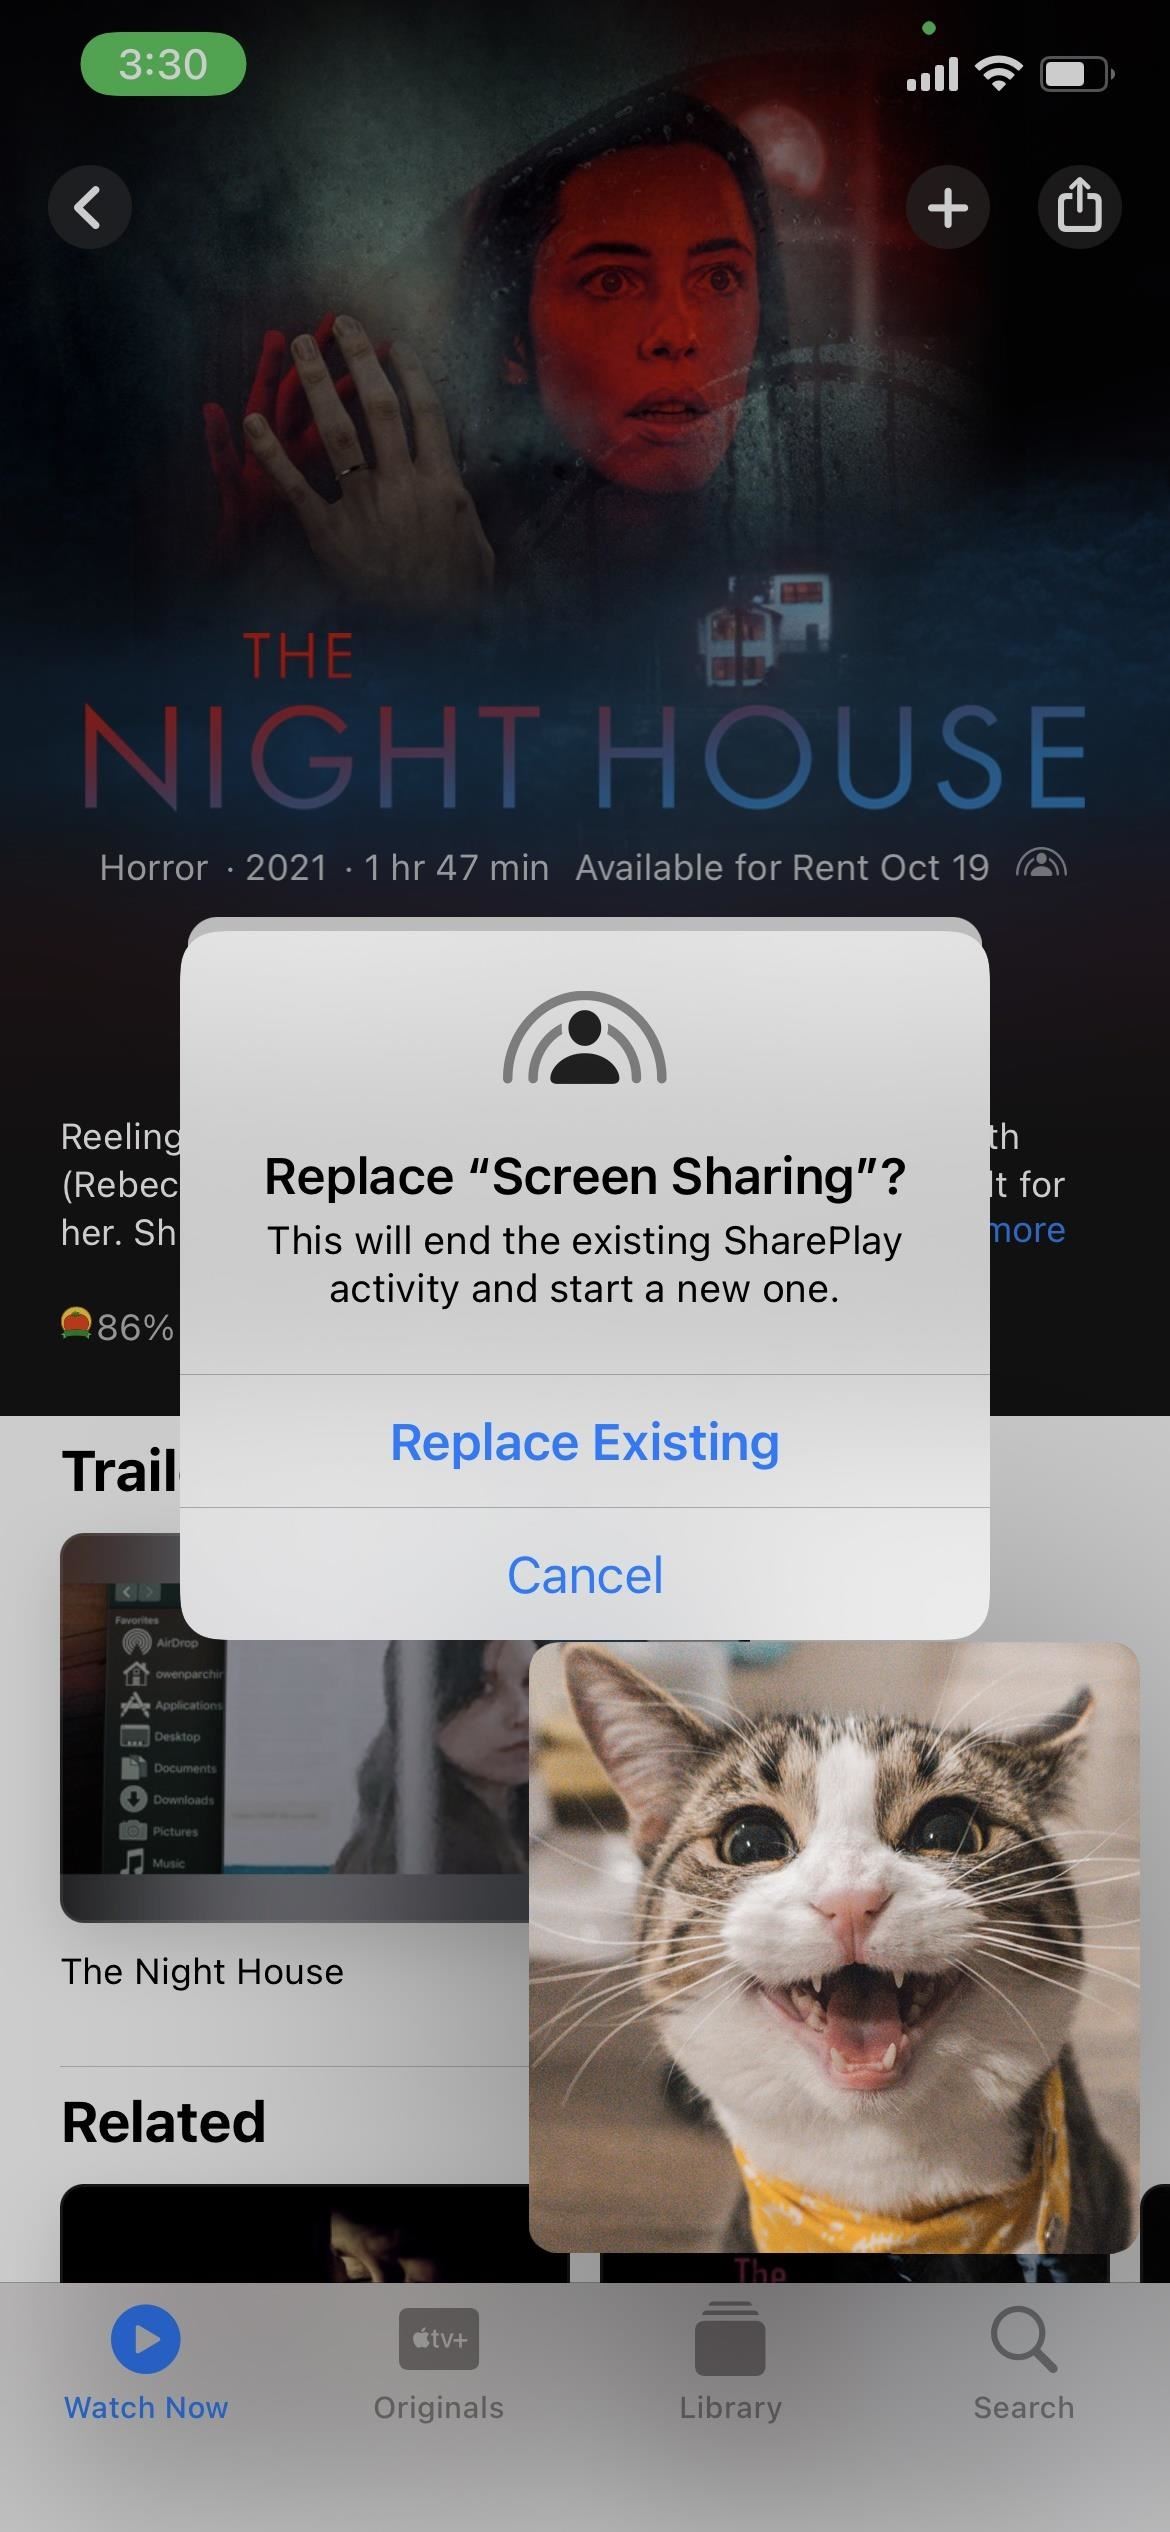 How to Screen Share on FaceTime in iOS 15 Using SharePlay